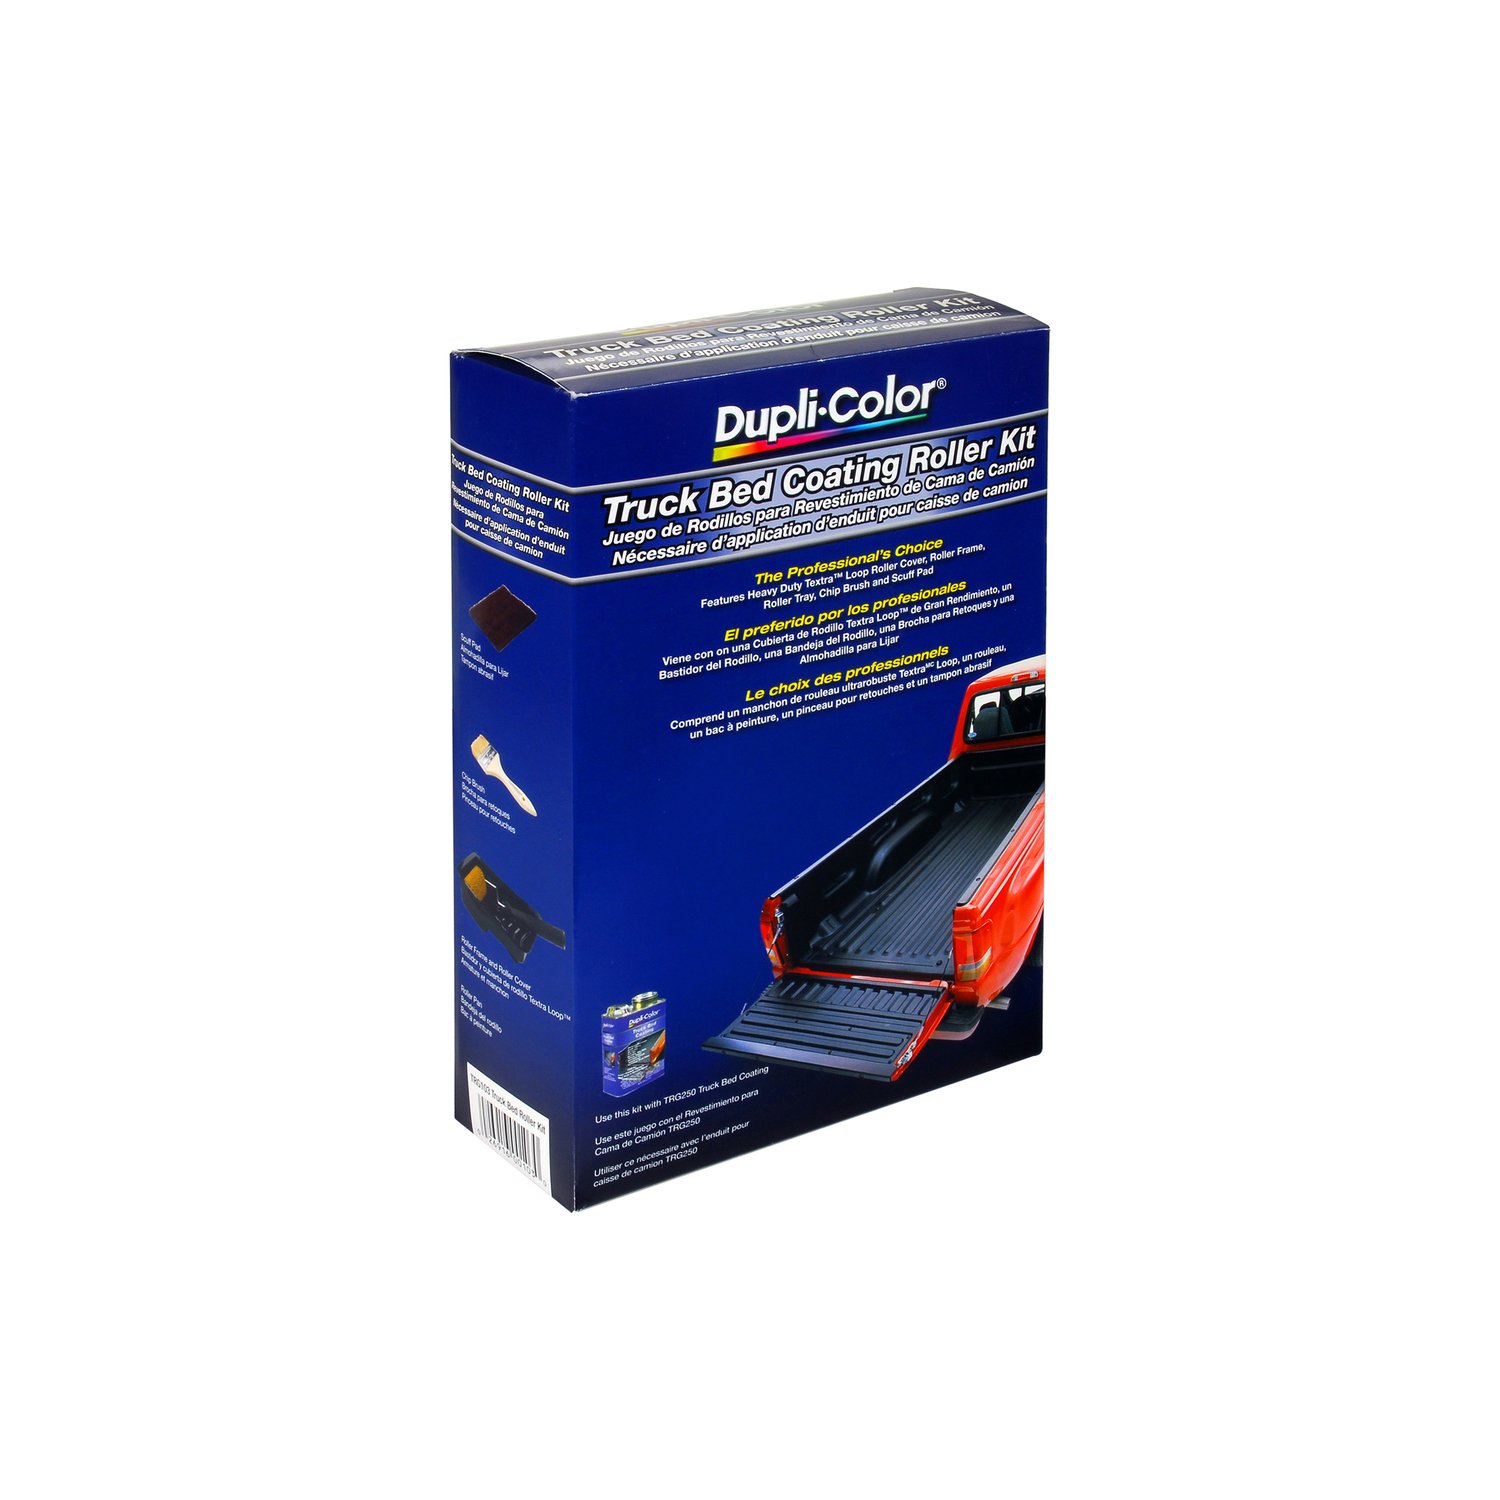 Truck Bed Coating Kit Includes: Textra Loop Roller